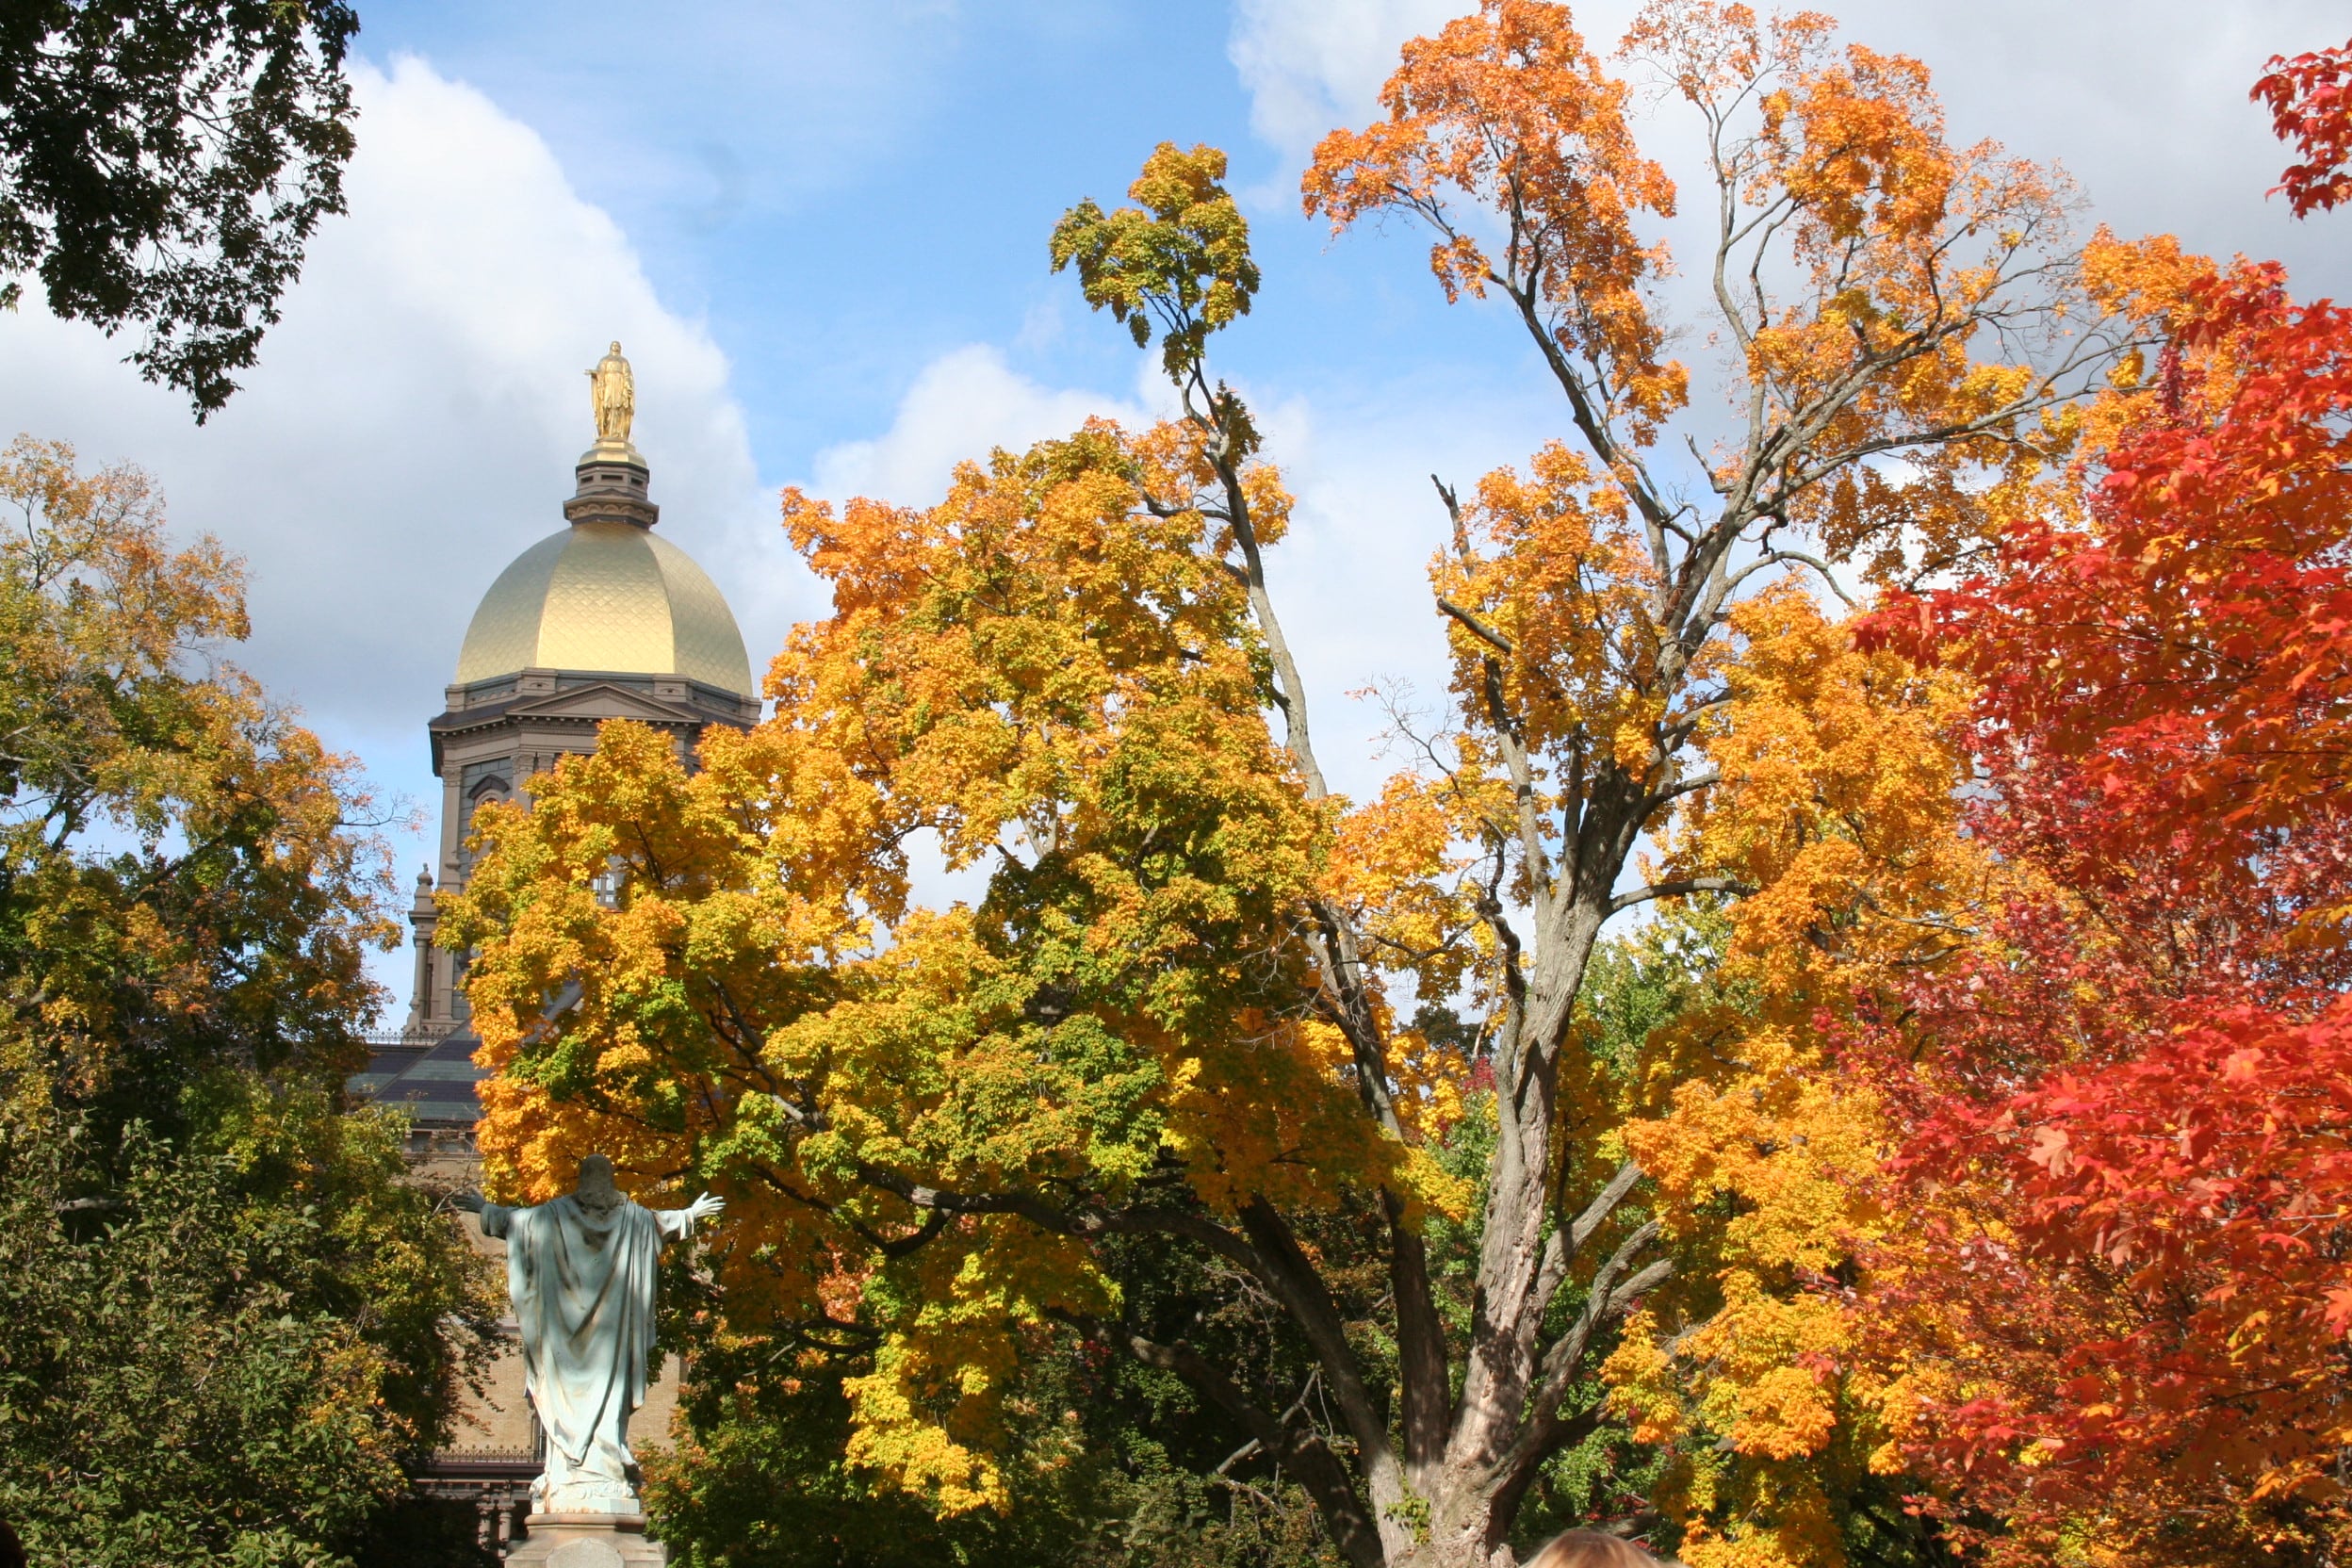 A gold-domed building surrounded by fall colors